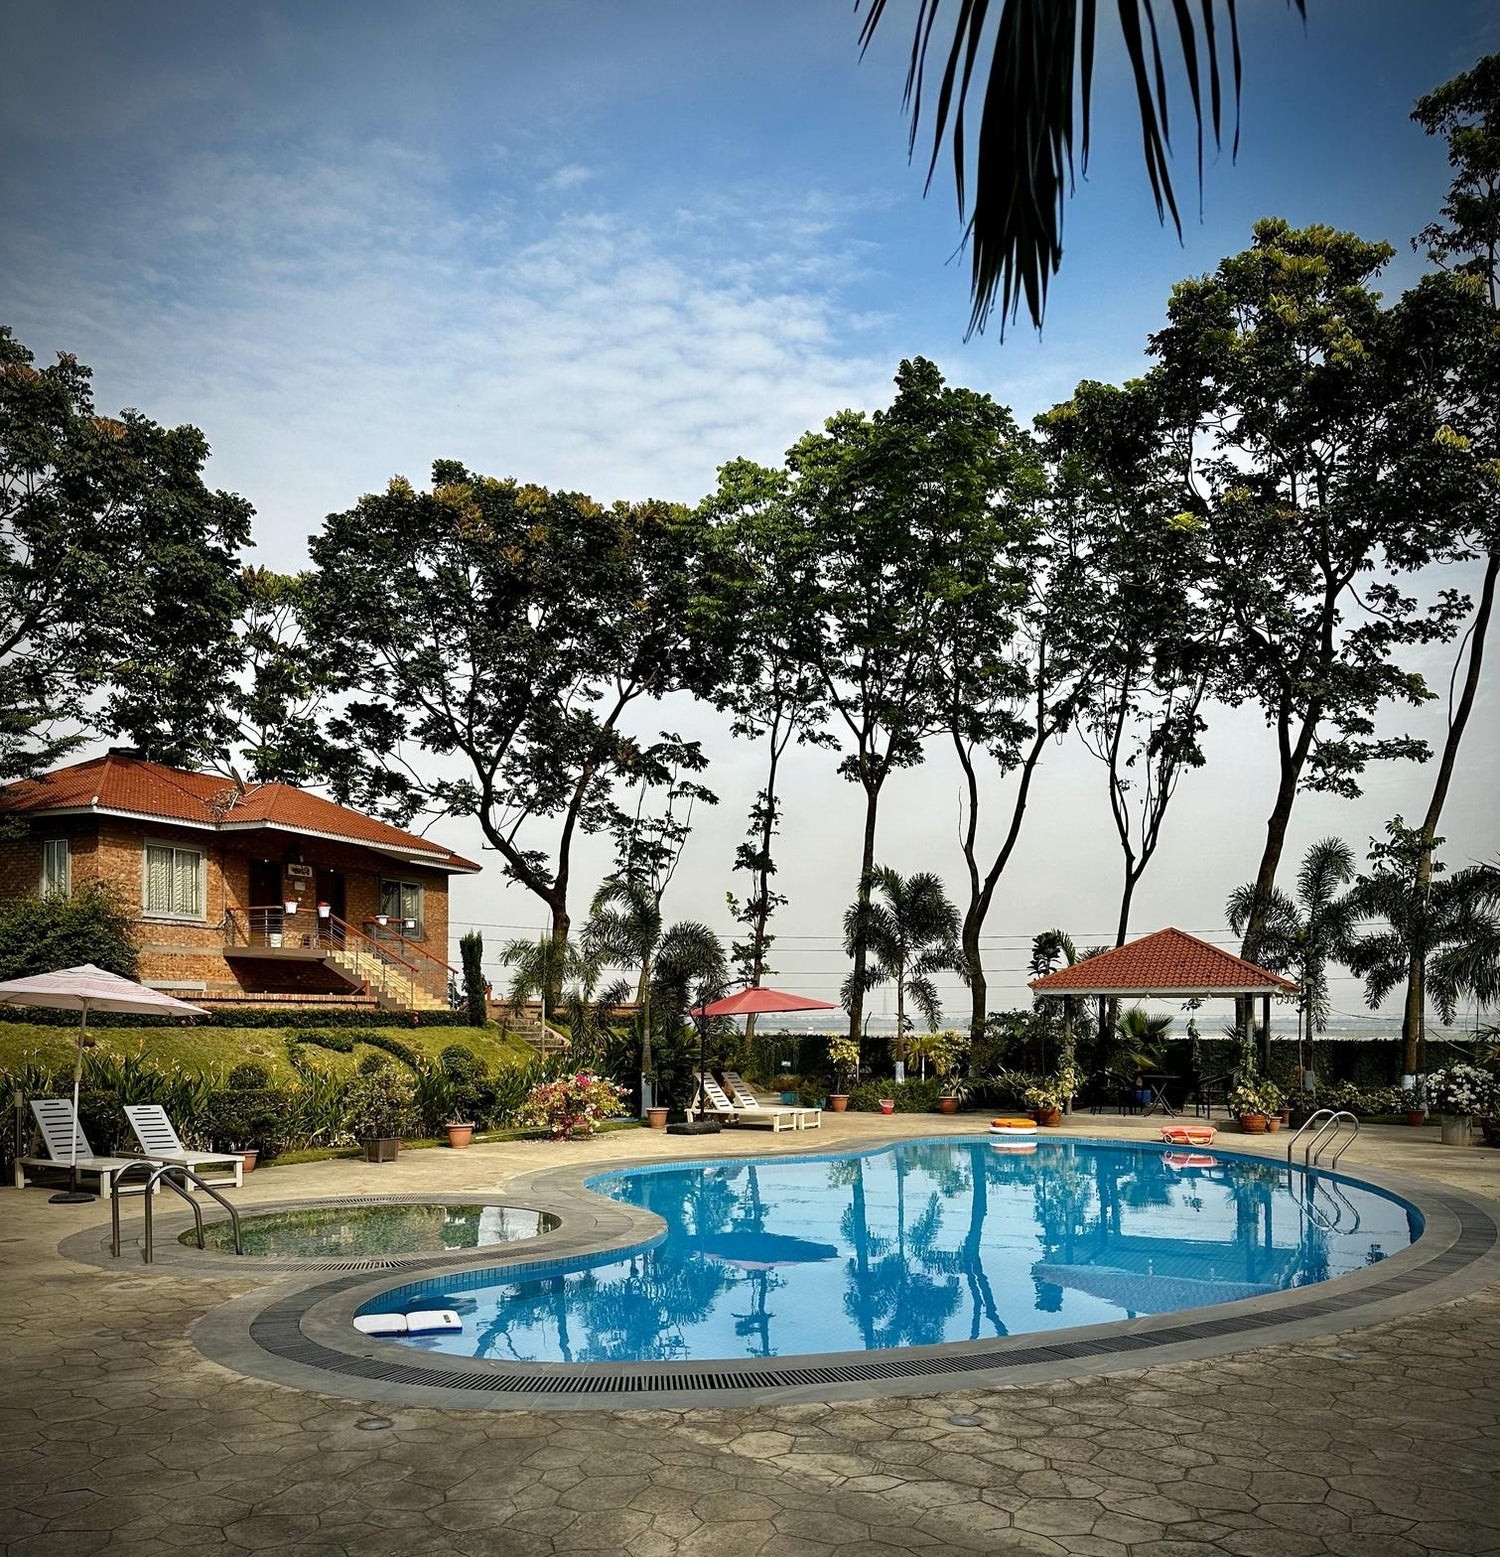 Tranquil resort pool at a Barnochata Dhaka hotel in Savar, surrounded by lush greenery and traditional architecture, reflecting relaxation and luxury